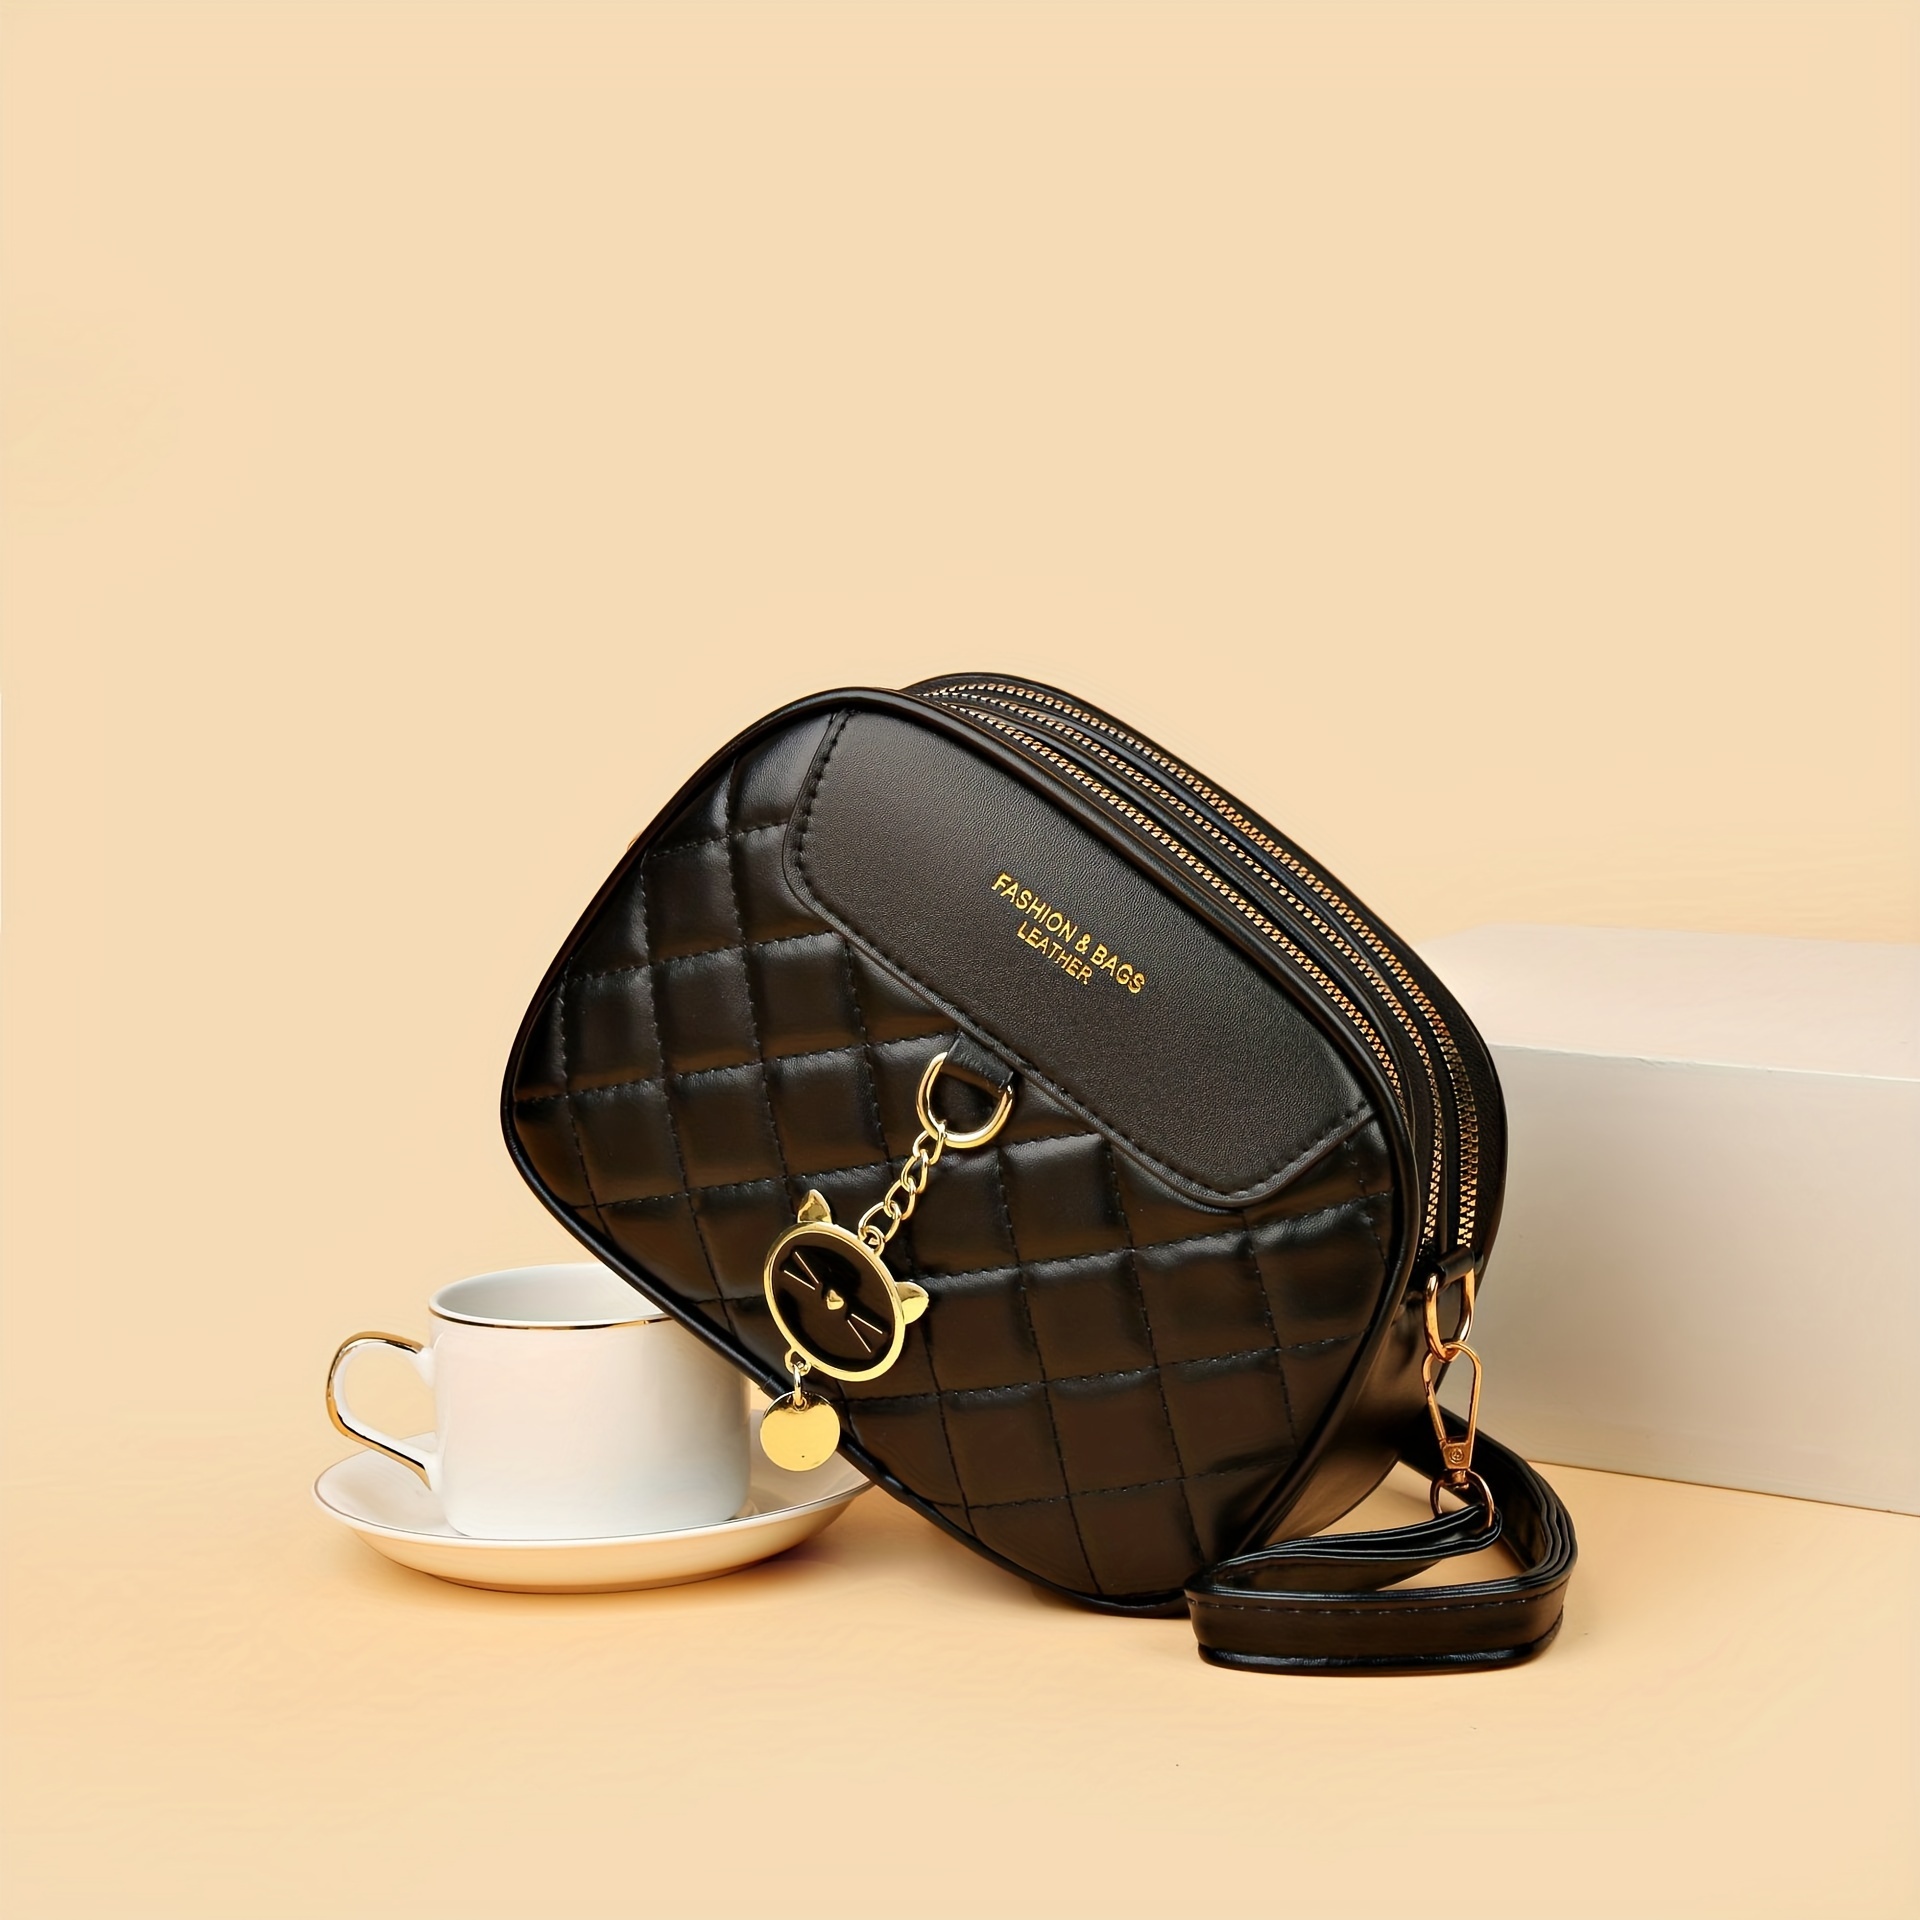 

Classic Chic Quilted Crossbody Bag, Pu Leather, Black, Elegant Shoulder Purse With Zipper And Golden-tone Cat Charm